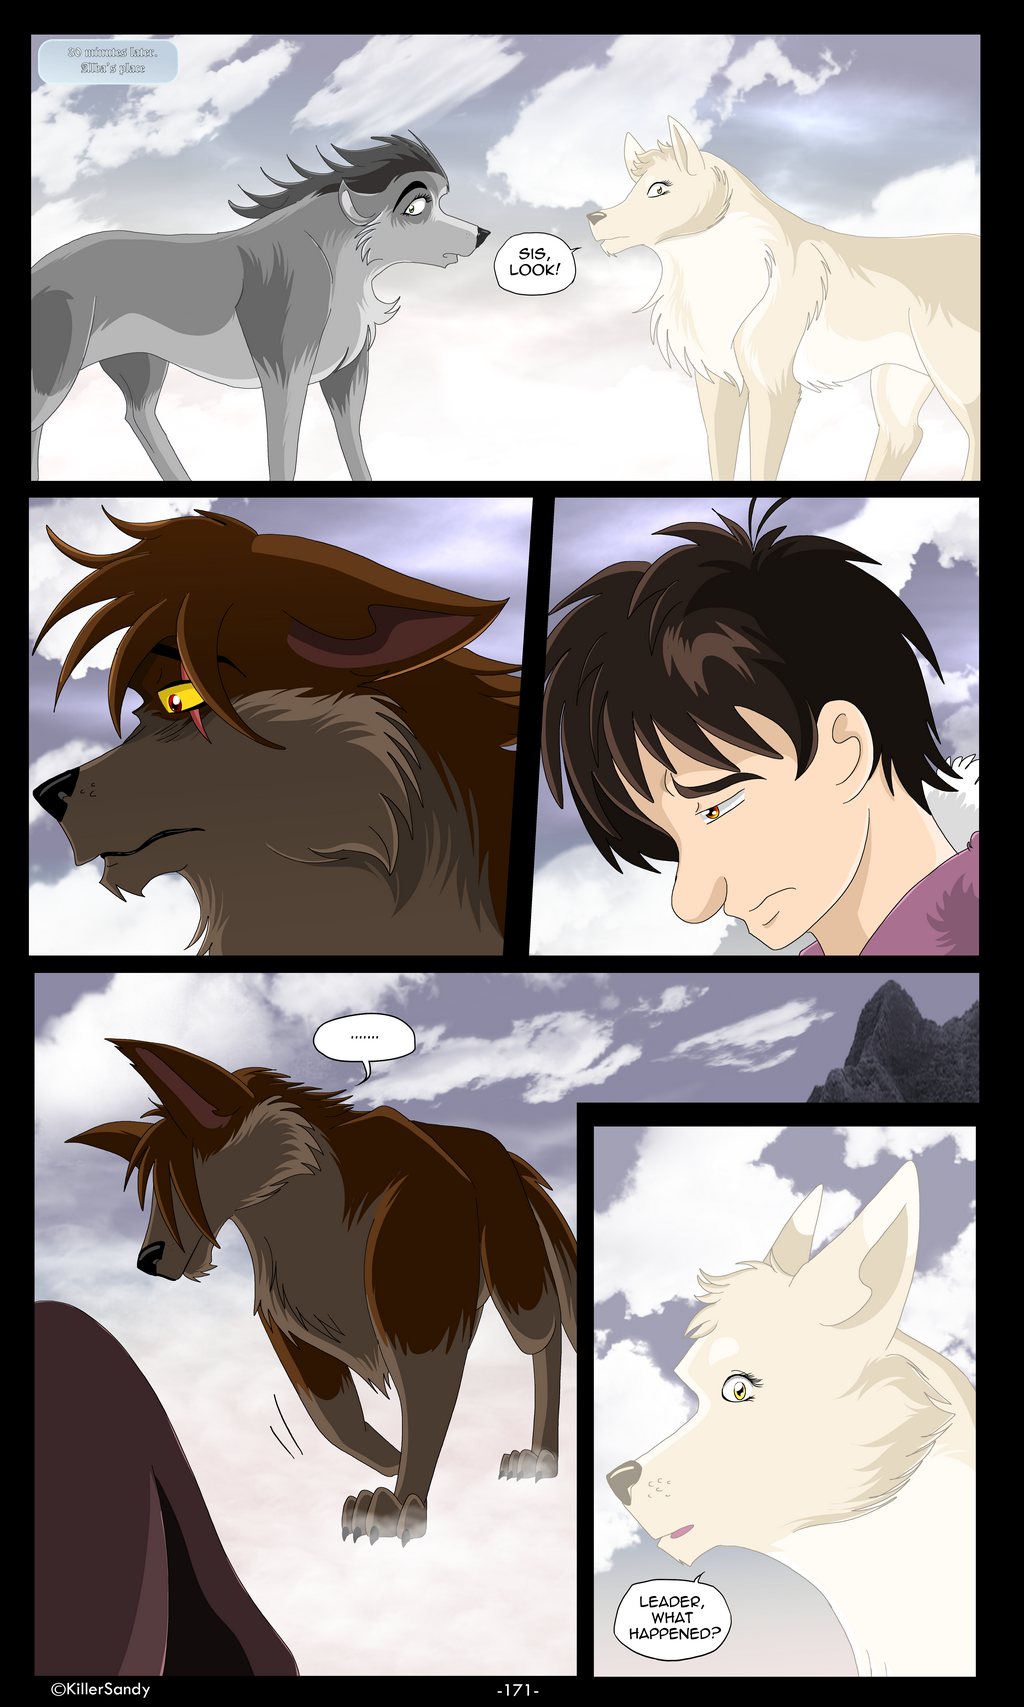 The Prince of the Moonlight Stone page 171